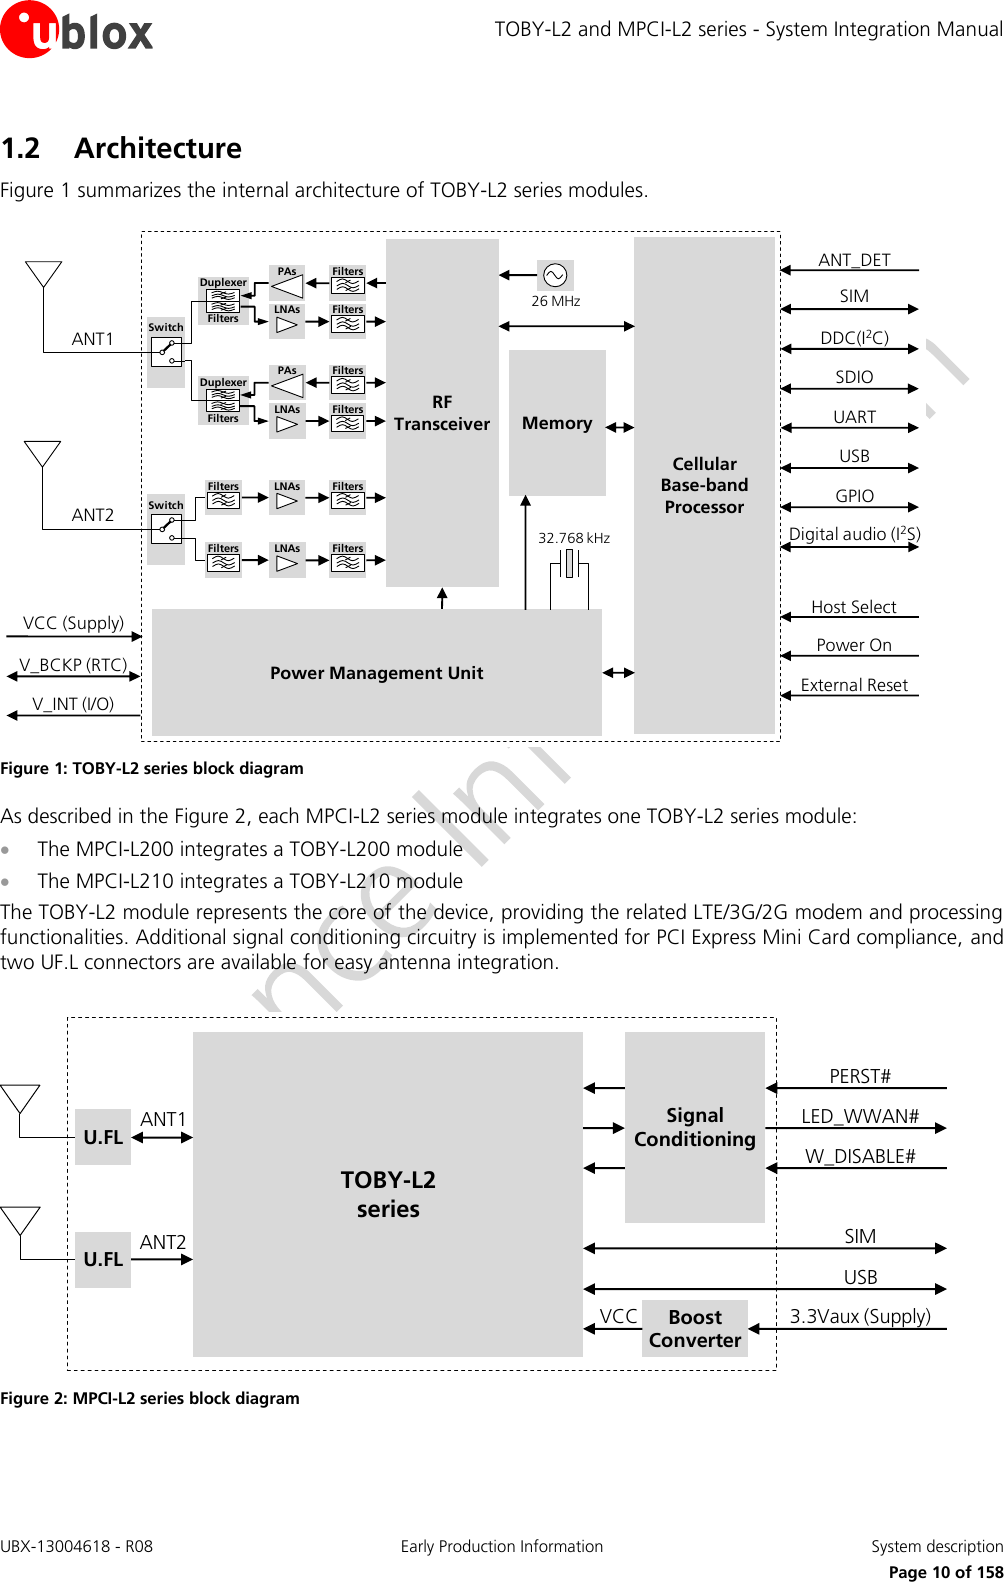 TOBY-L2 and MPCI-L2 series - System Integration Manual UBX-13004618 - R08  Early Production Information  System description     Page 10 of 158 1.2 Architecture Figure 1 summarizes the internal architecture of TOBY-L2 series modules. CellularBase-bandProcessorMemoryPower Management Unit26 MHz32.768 kHzANT1RF TransceiverANT2V_INT (I/O)V_BCKP (RTC)VCC (Supply)SIMUSBGPIOPower OnExternal ResetPAsLNAs FiltersFiltersDuplexerFiltersPAsLNAs FiltersFiltersDuplexerFiltersLNAs FiltersFiltersLNAs FiltersFiltersSwitchSwitchDDC(I2C)SDIOUARTDigital audio (I2S)ANT_DETHost Select Figure 1: TOBY-L2 series block diagram As described in the Figure 2, each MPCI-L2 series module integrates one TOBY-L2 series module:  The MPCI-L200 integrates a TOBY-L200 module  The MPCI-L210 integrates a TOBY-L210 module The TOBY-L2 module represents the core of the device, providing the related LTE/3G/2G modem and processing functionalities. Additional signal conditioning circuitry is implemented for PCI Express Mini Card compliance, and two UF.L connectors are available for easy antenna integration.  ANT1SIMUSBW_DISABLE#TOBY-L2seriesSignal ConditioningANT2PERST#LED_WWAN#U.FLU.FL3.3Vaux (Supply)Boost ConverterVCC Figure 2: MPCI-L2 series block diagram   